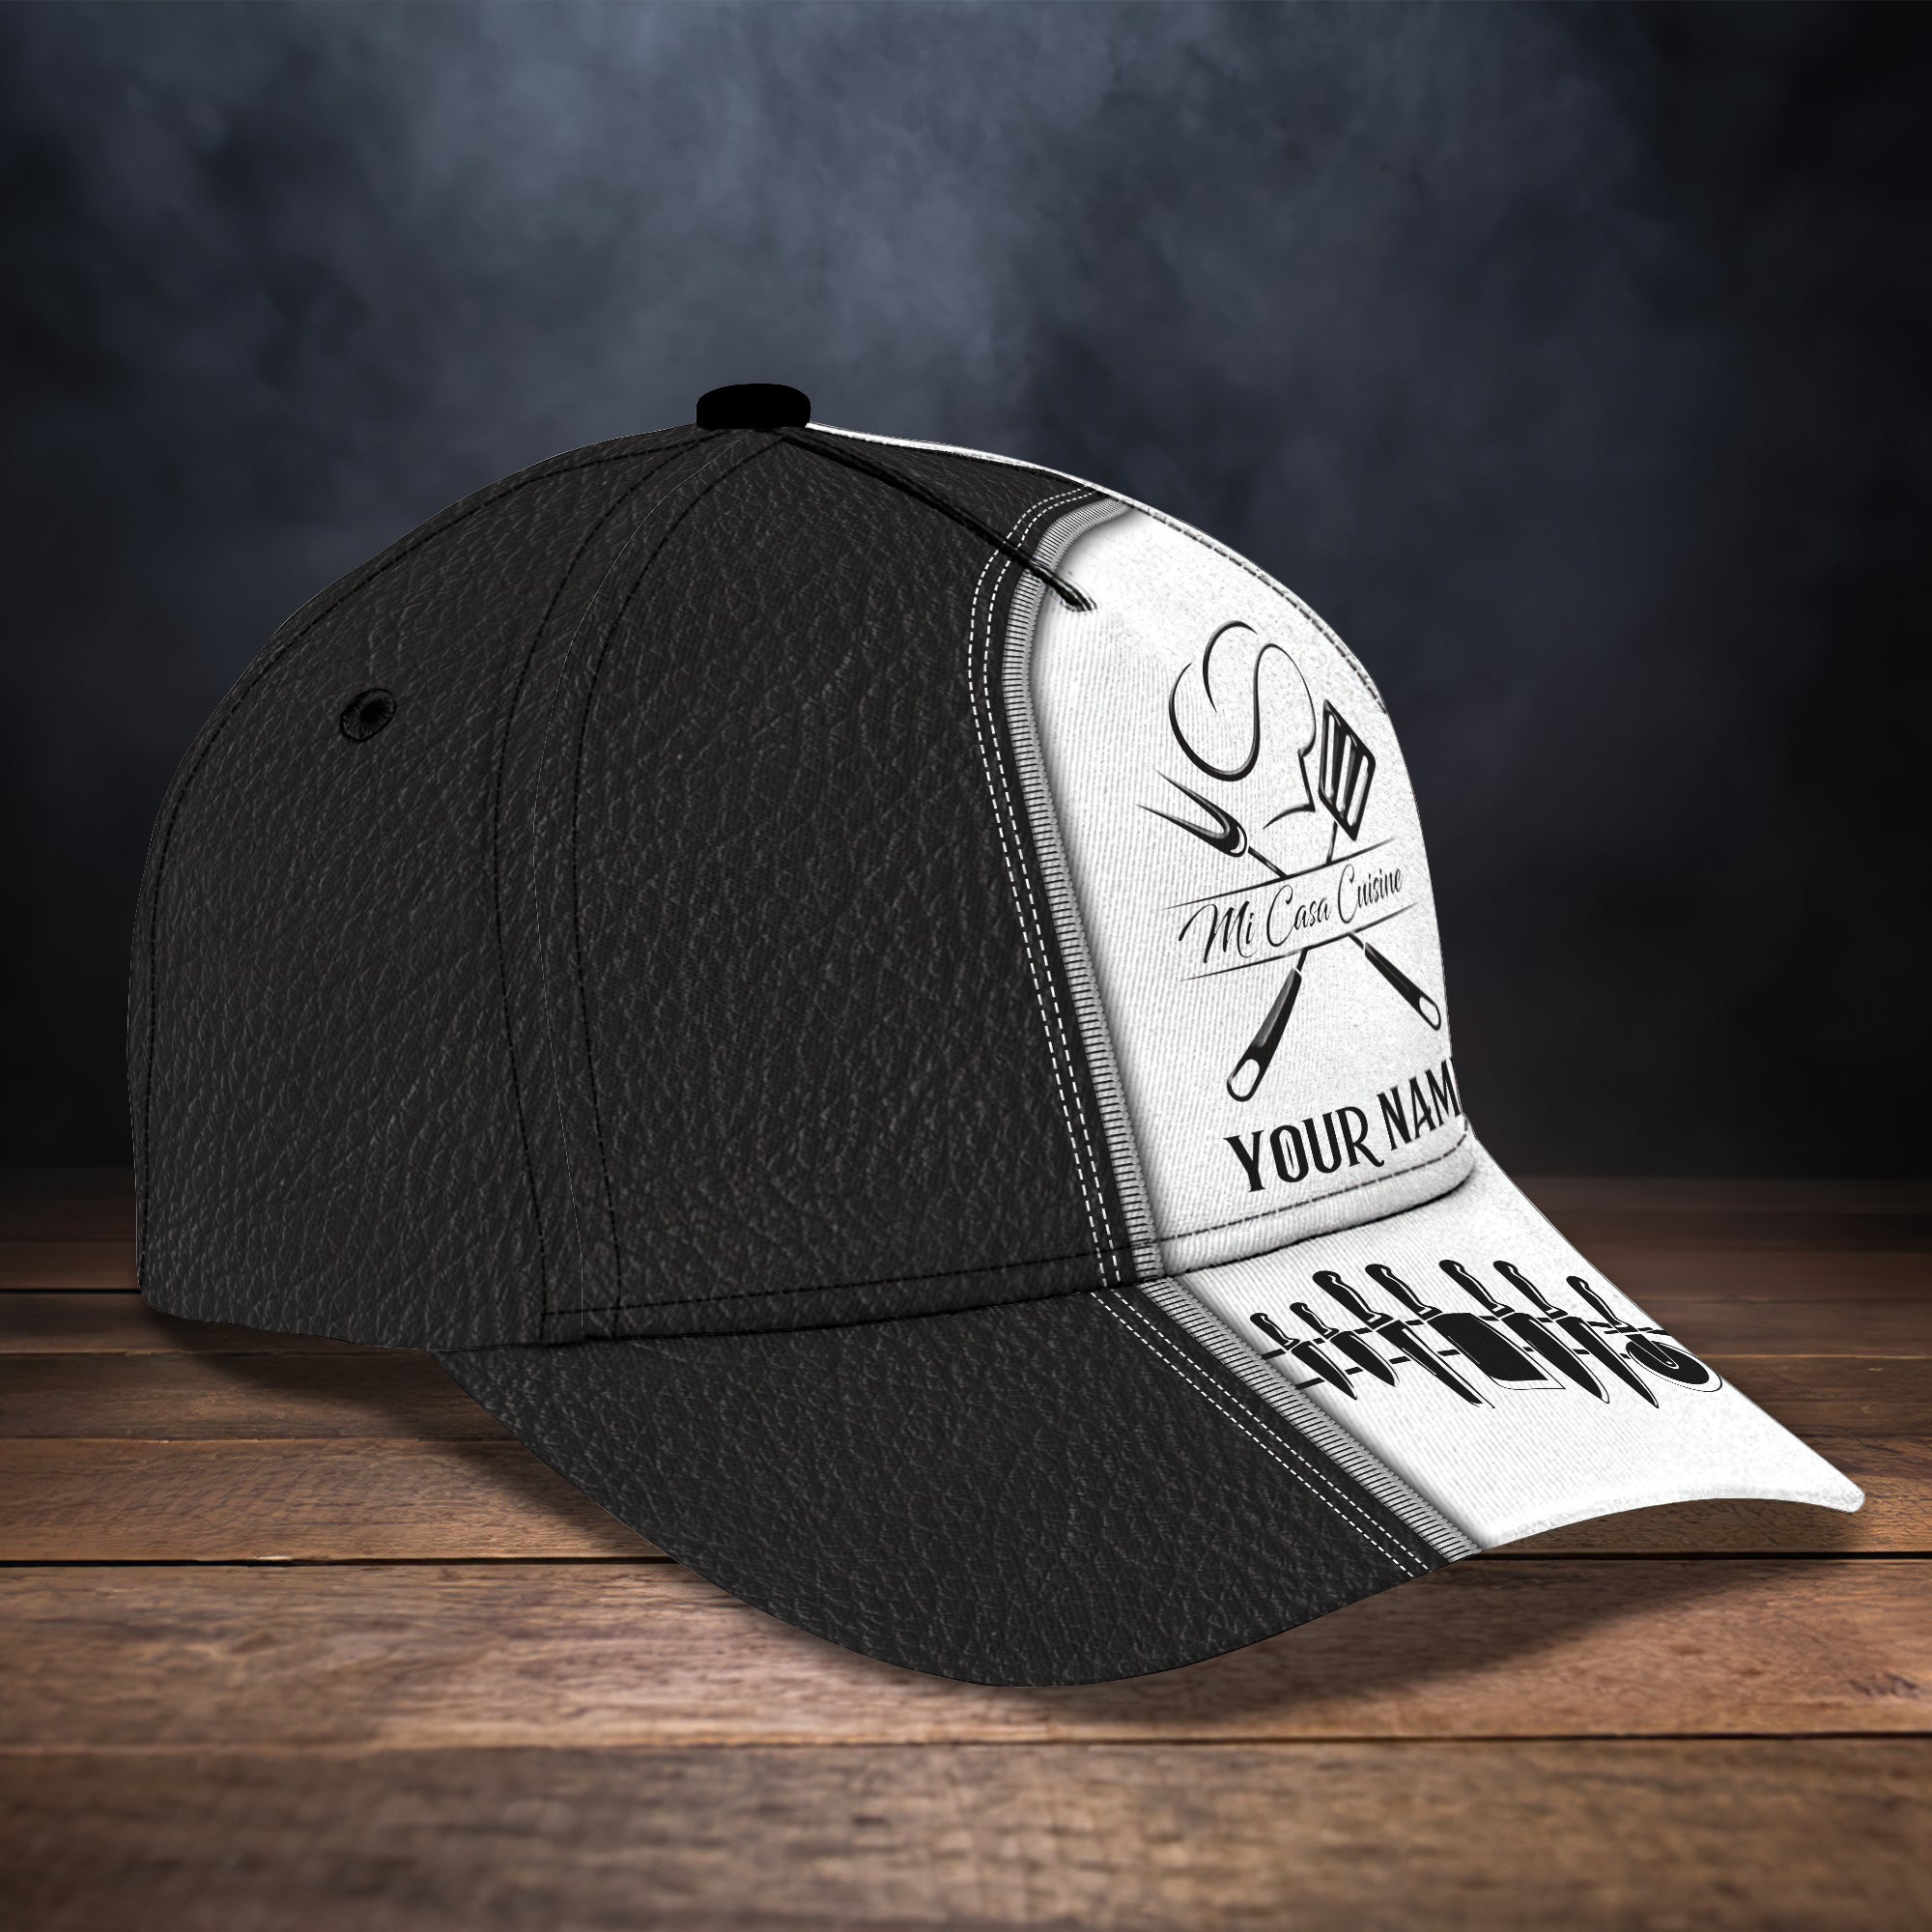 RINC98 - Personalized Name Cap - Chef06